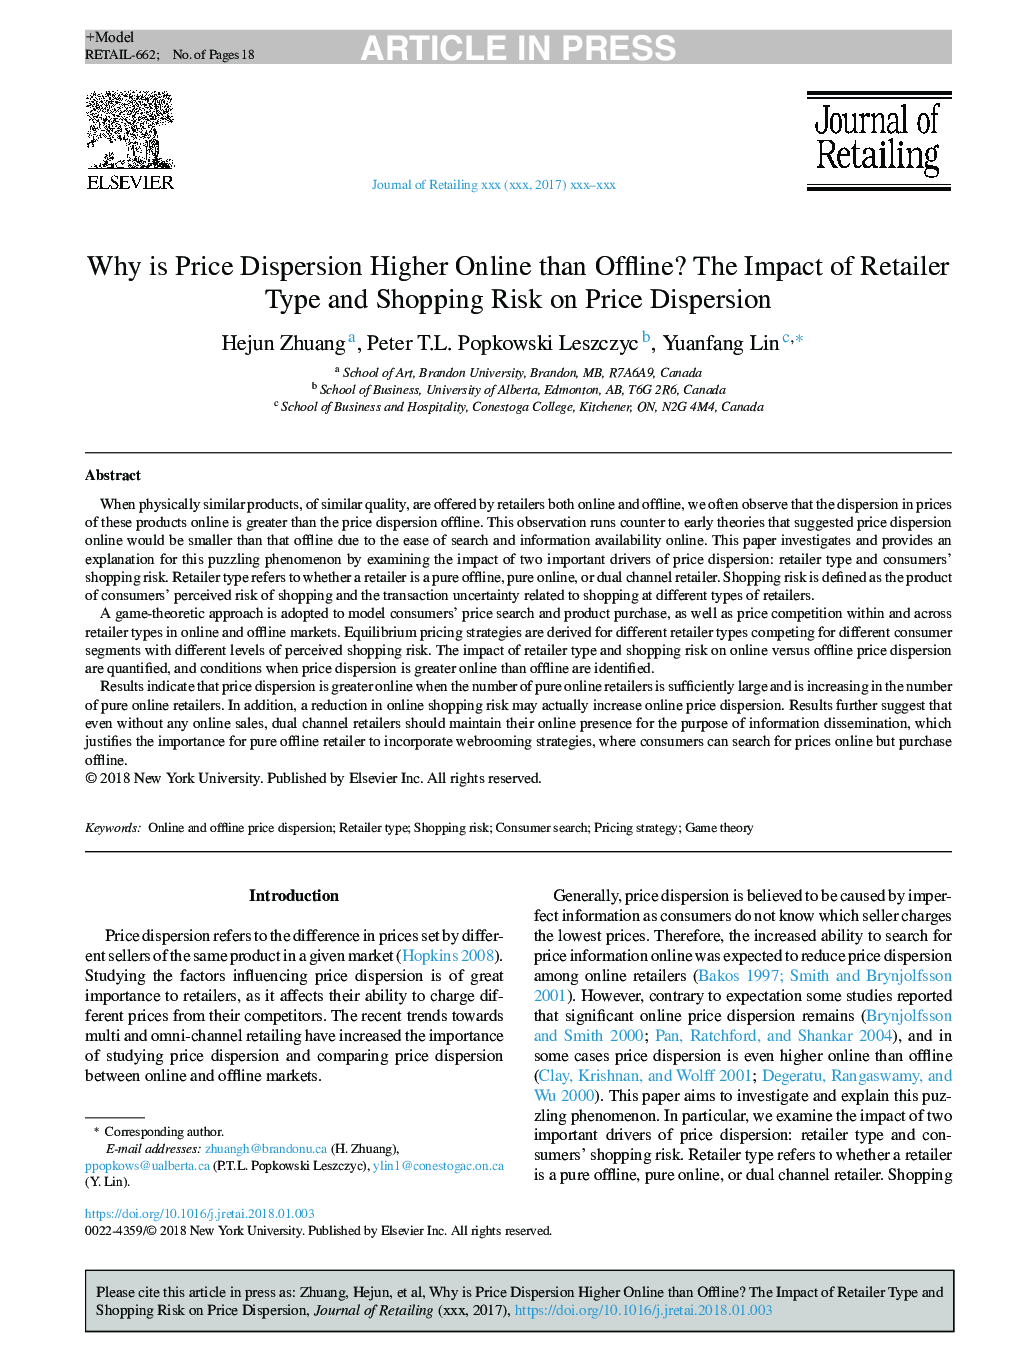 Why is Price Dispersion Higher Online than Offline? The Impact of Retailer Type and Shopping Risk on Price Dispersion